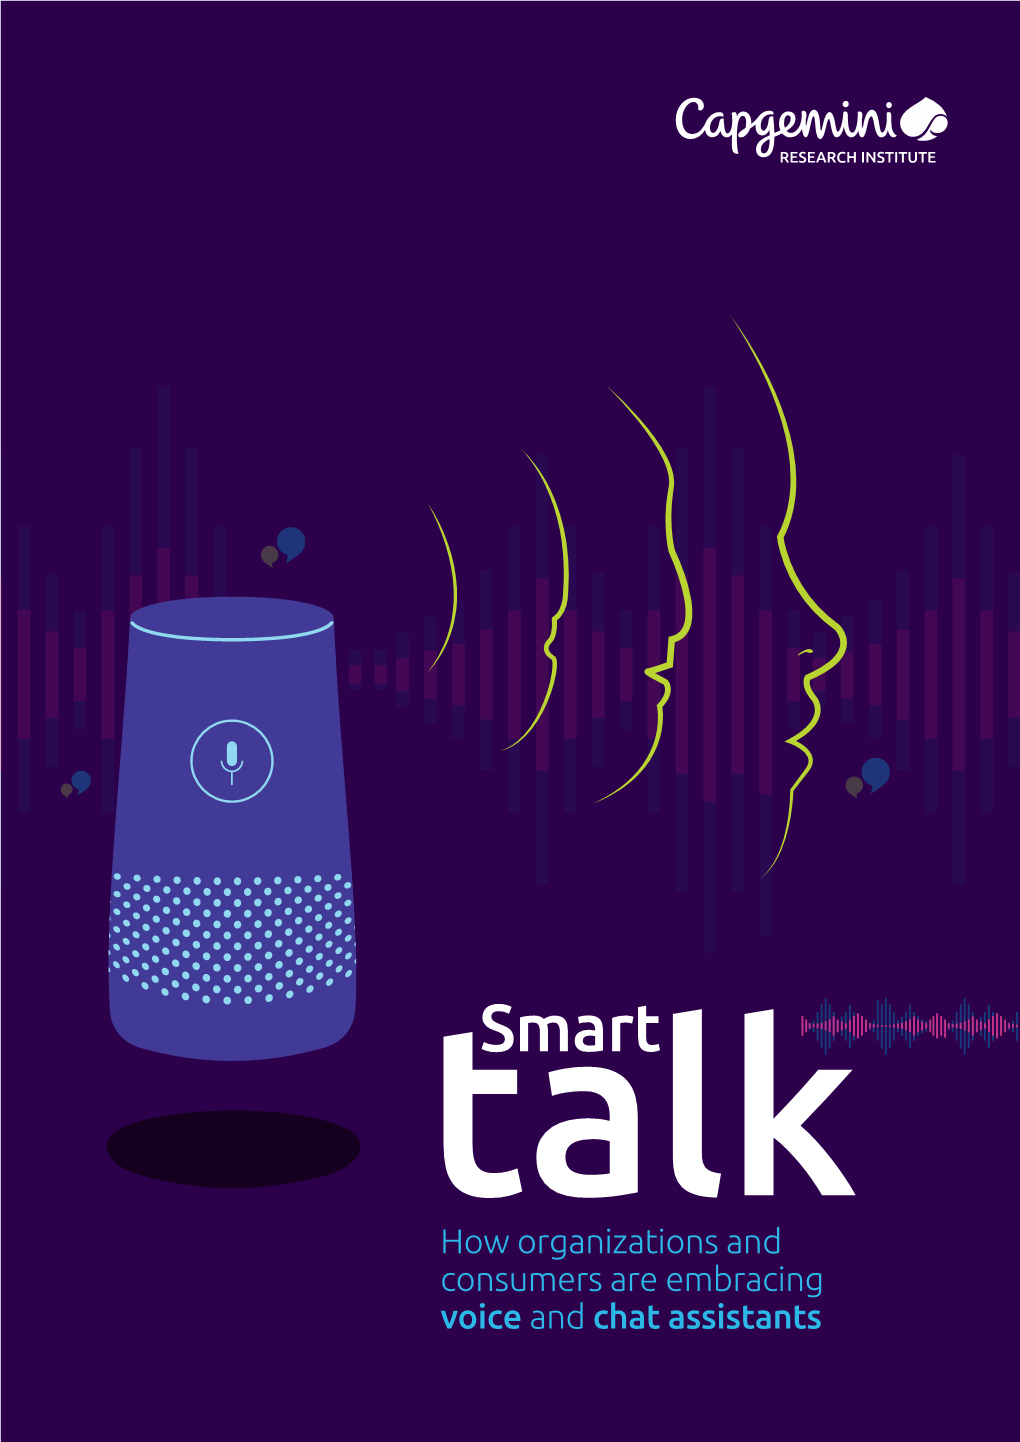 Smart Talk: How Organizations and Consumers Are Embracing Voice and Chat Assistants Introduction